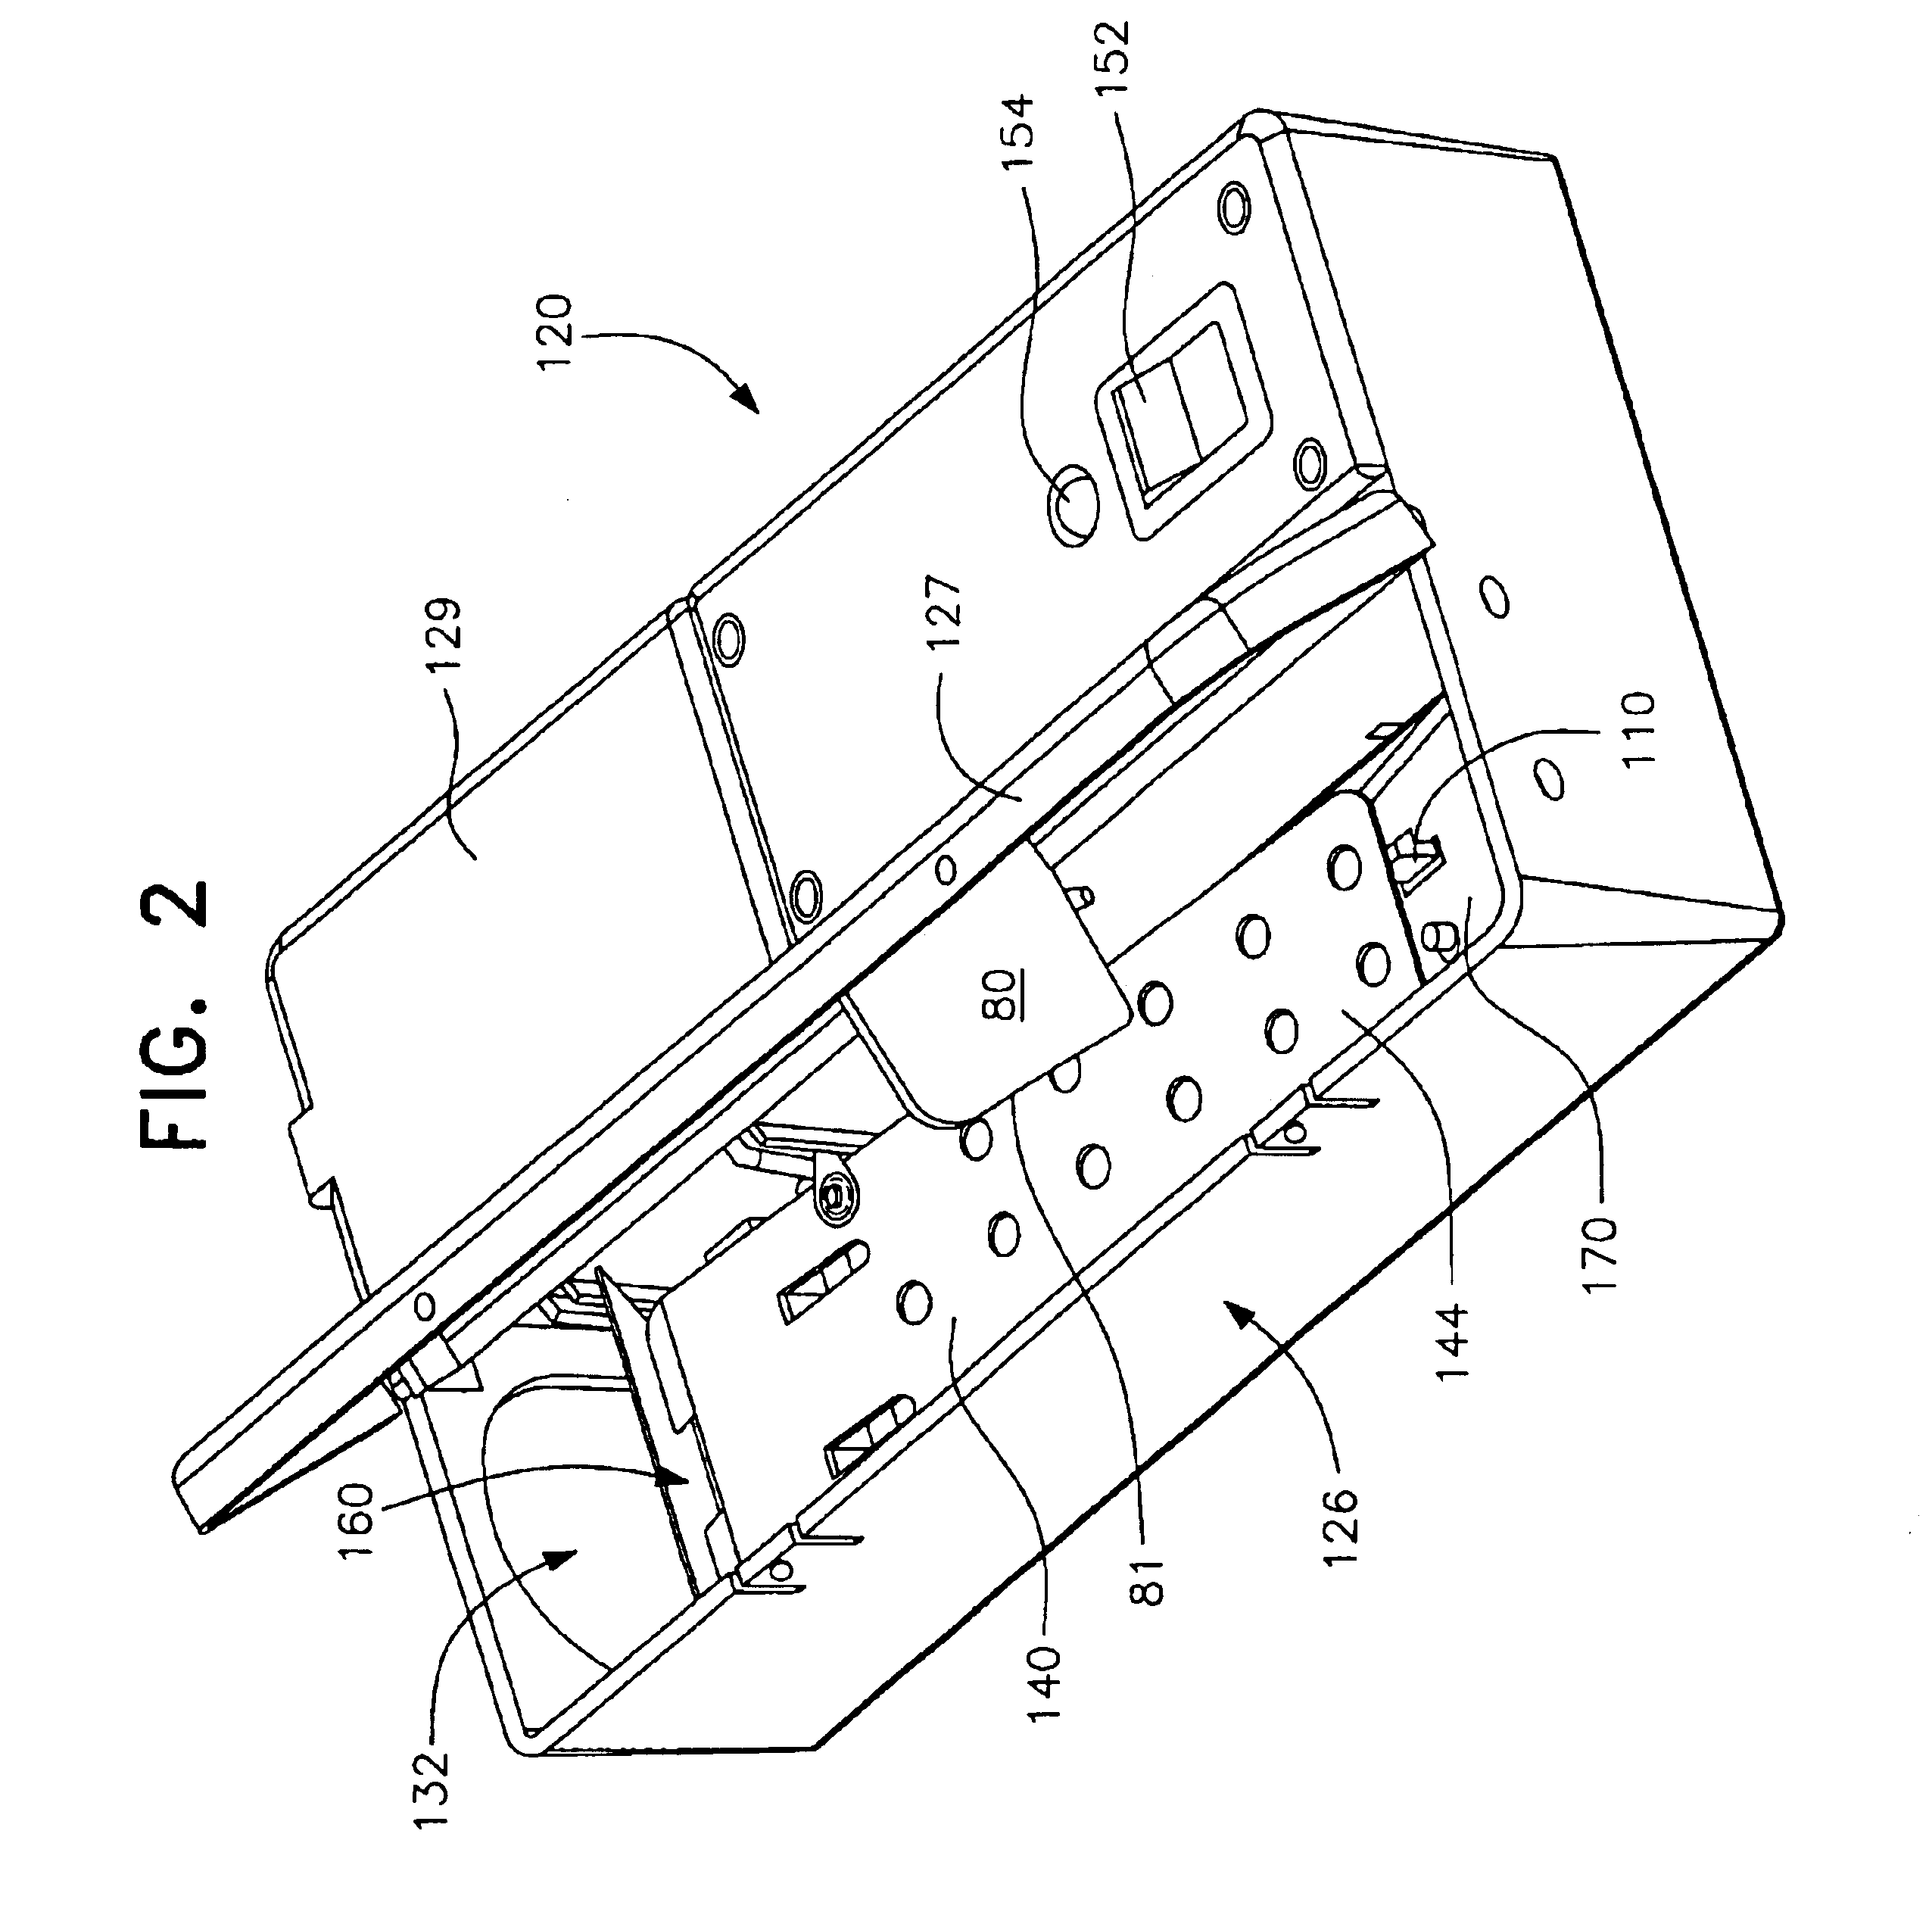 CPU-controlled, rearming, high voltage output circuit for electronic animal trap